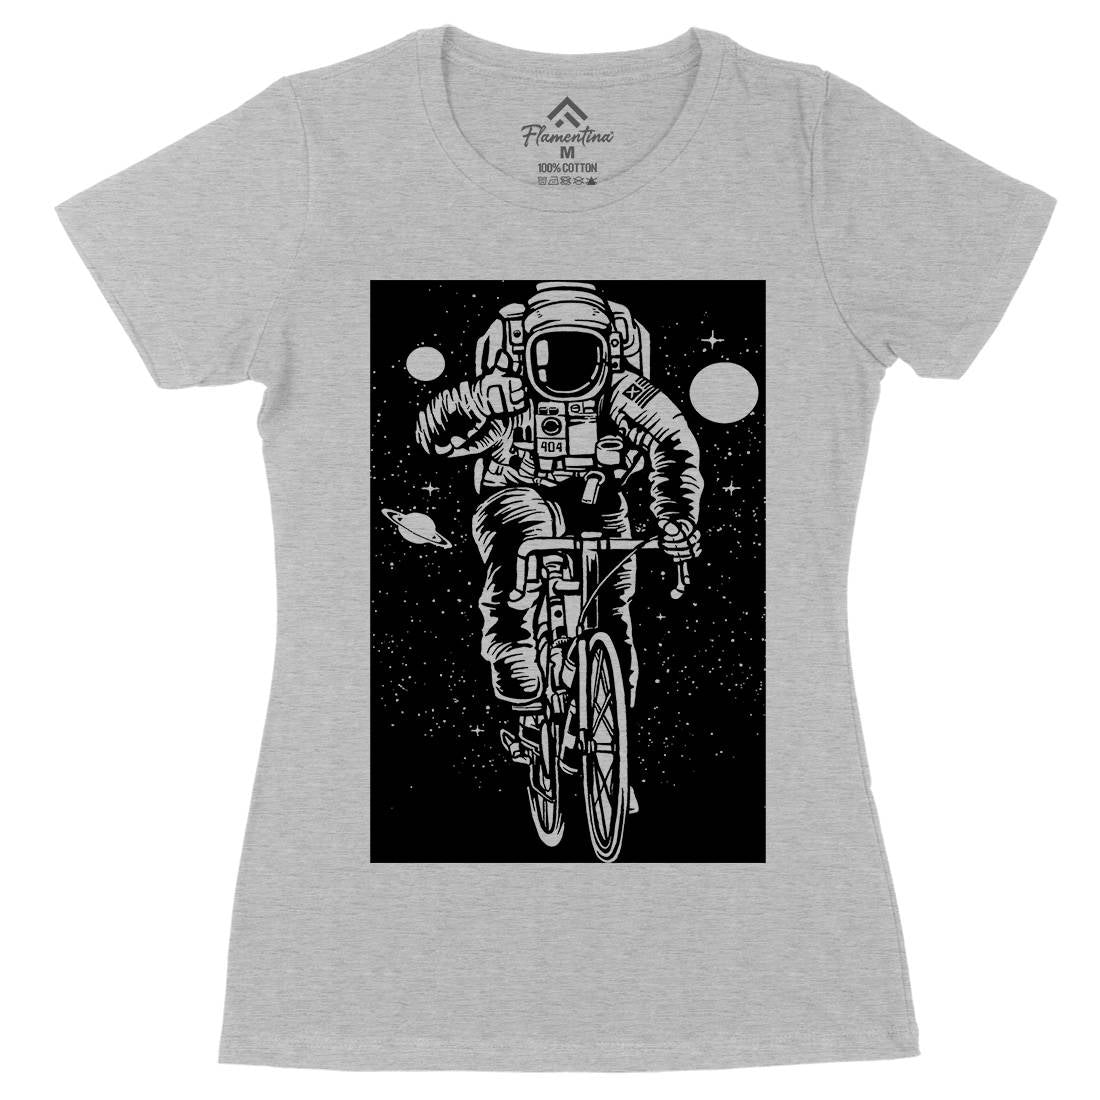 Astronaut Bicycle Womens Organic Crew Neck T-Shirt Space A503